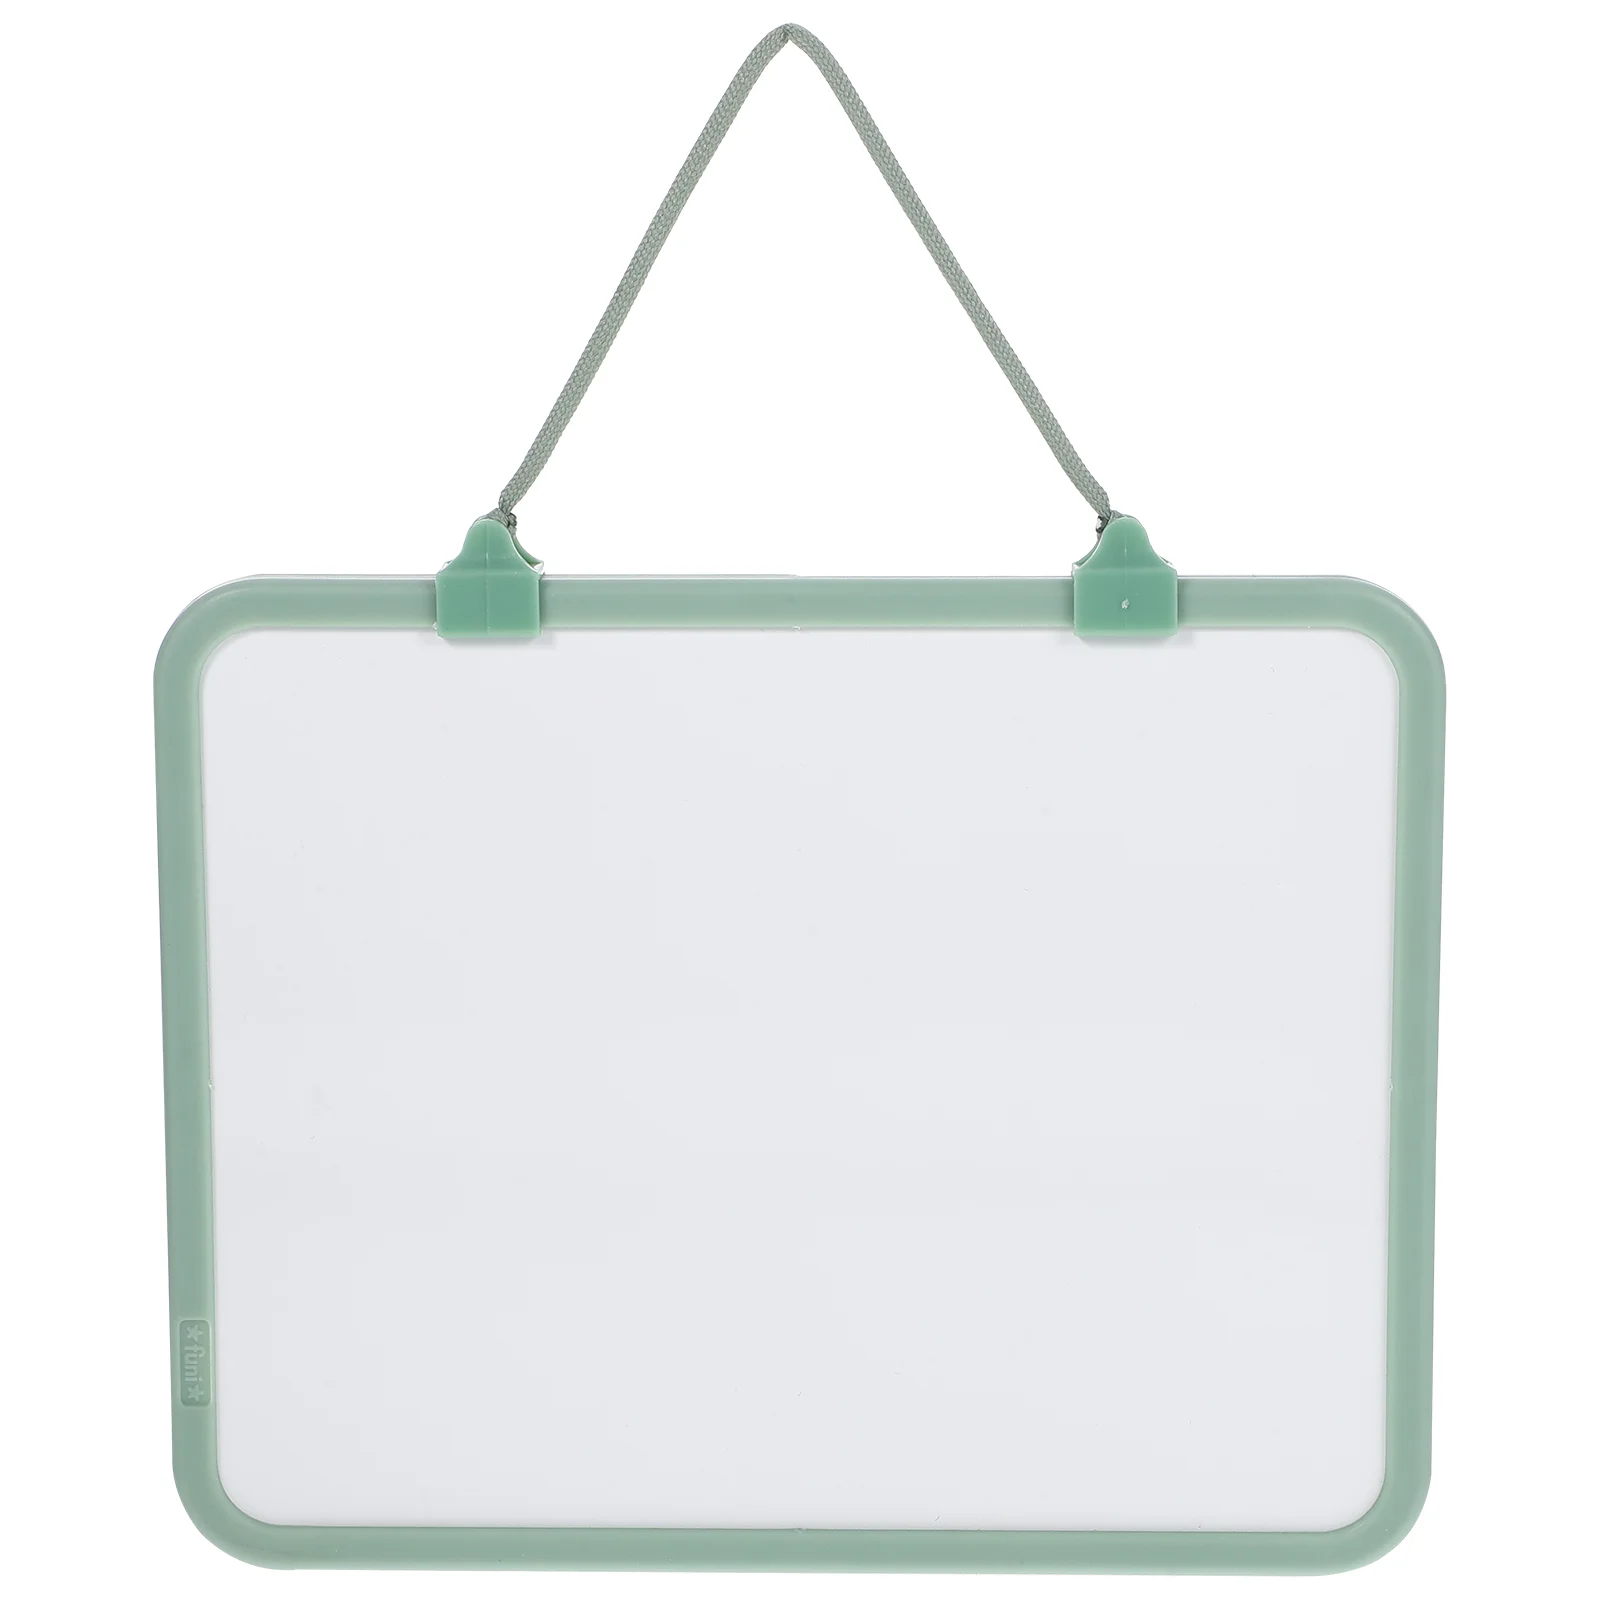 

Portable Writing Board Magnetic Surface Dry Erase Board Multi-use Whiteboard Small Whiteboard